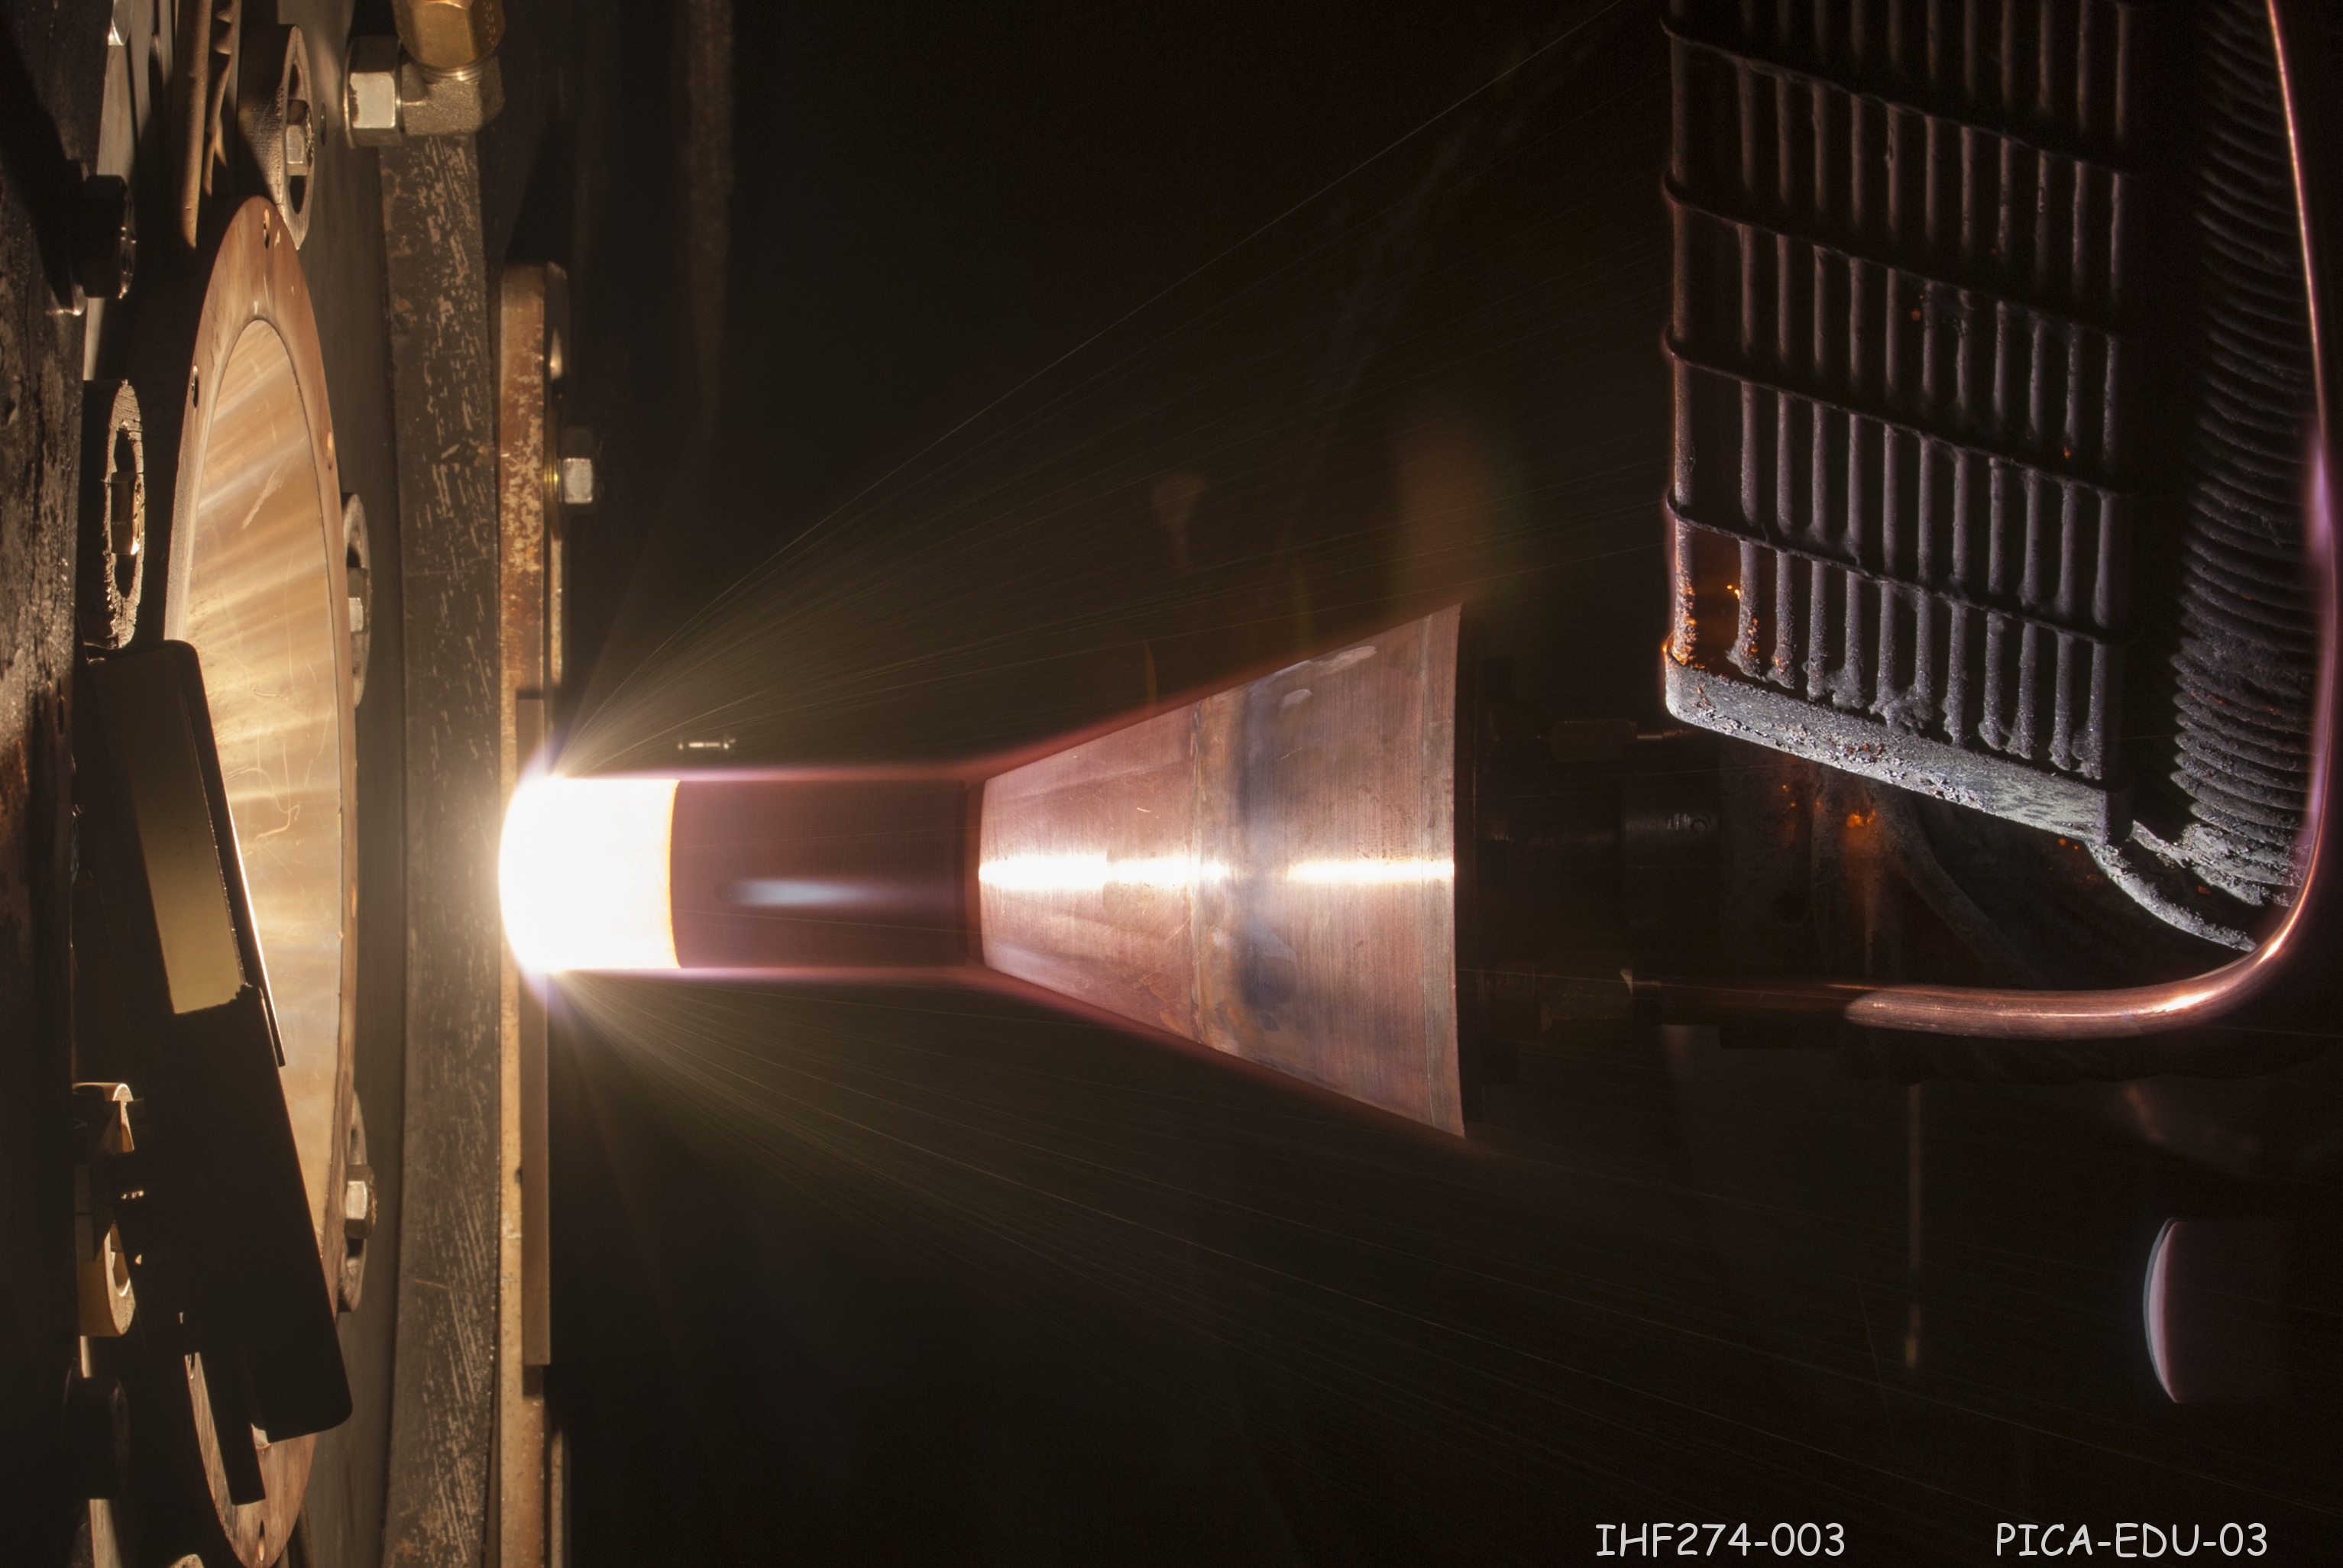 The OSIRIS-REx spacecraft's heat shield is made of a material developed at Ames: phenolic-impregnated carbon ablator (PICA). In this photo, PICA is undergoing testing in Ames' arc jet facility, which simulates atmospheric re-entry conditions, to confirm thermal protection performance for the heat shield's design.